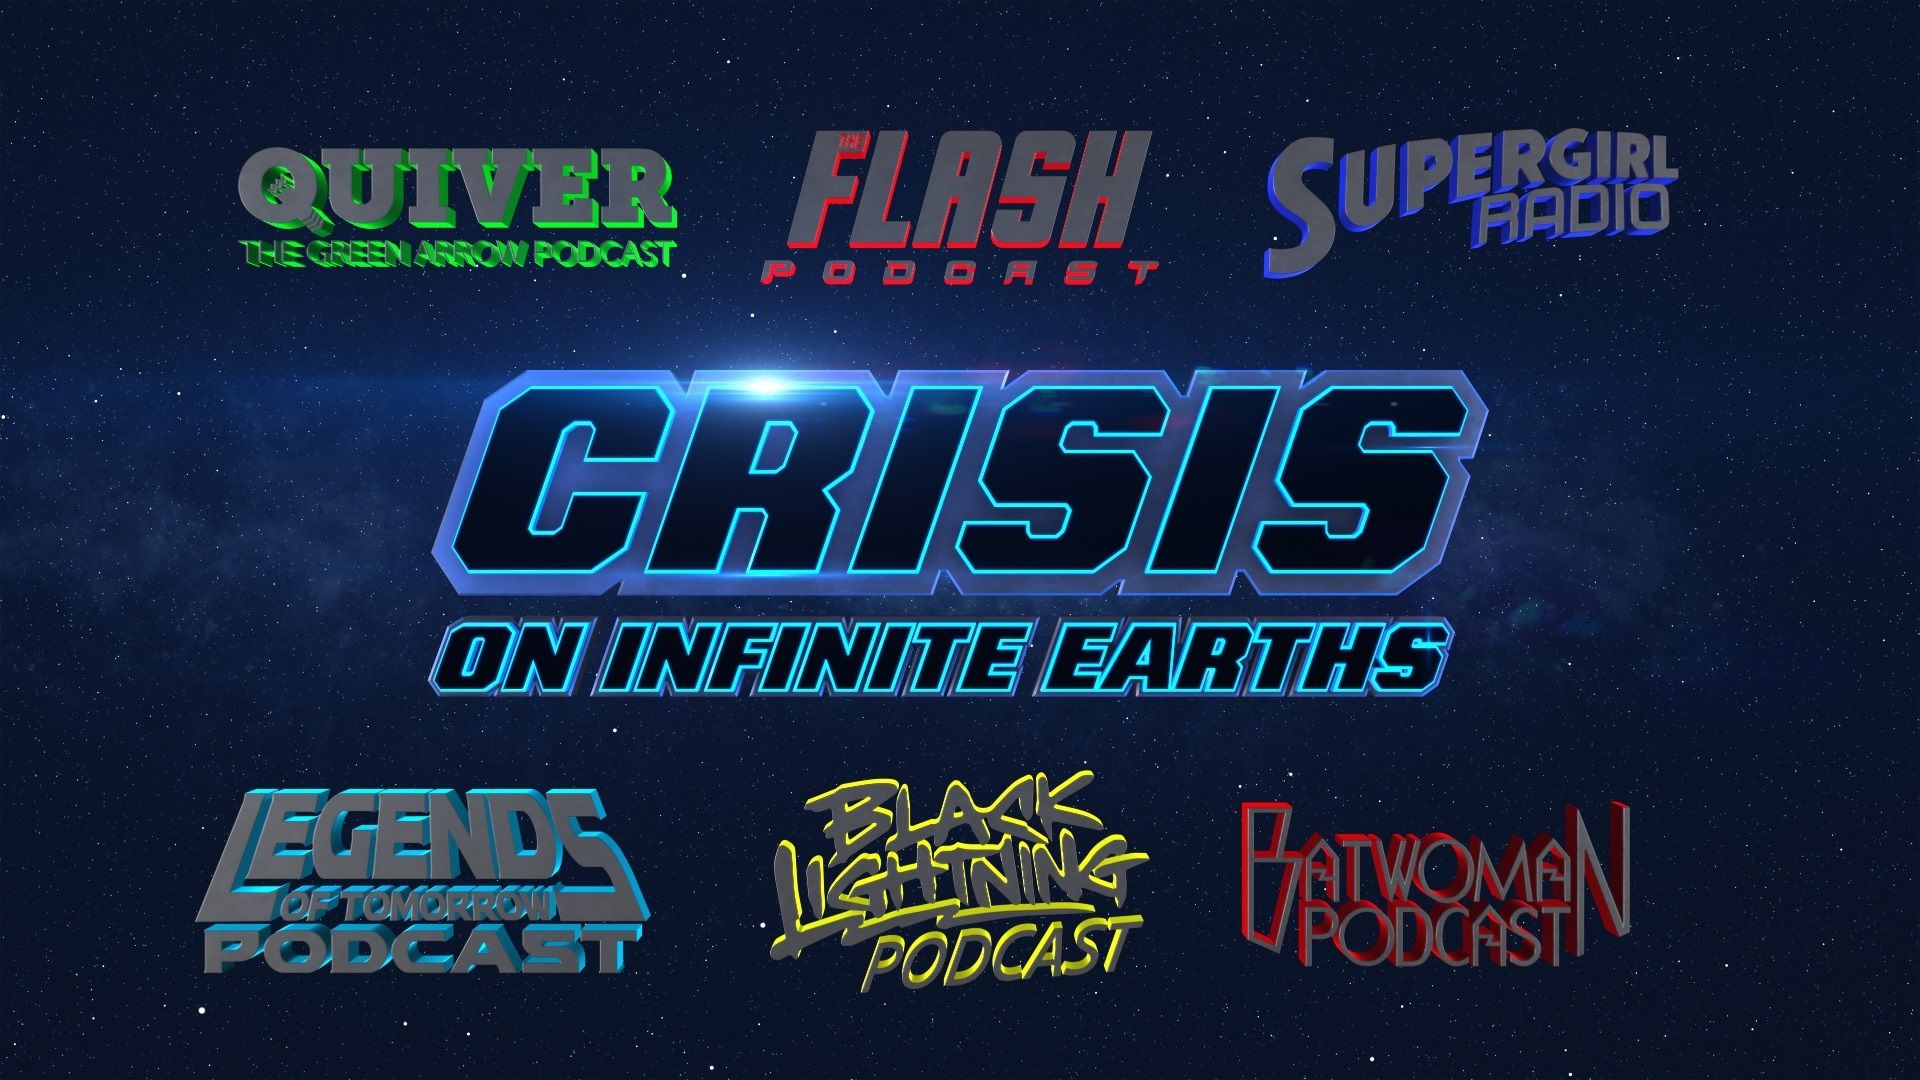 Legends Of Tomorrow Podcast Season 4.5 6: Crisis on Infinite Earths (Part 3) Crossover